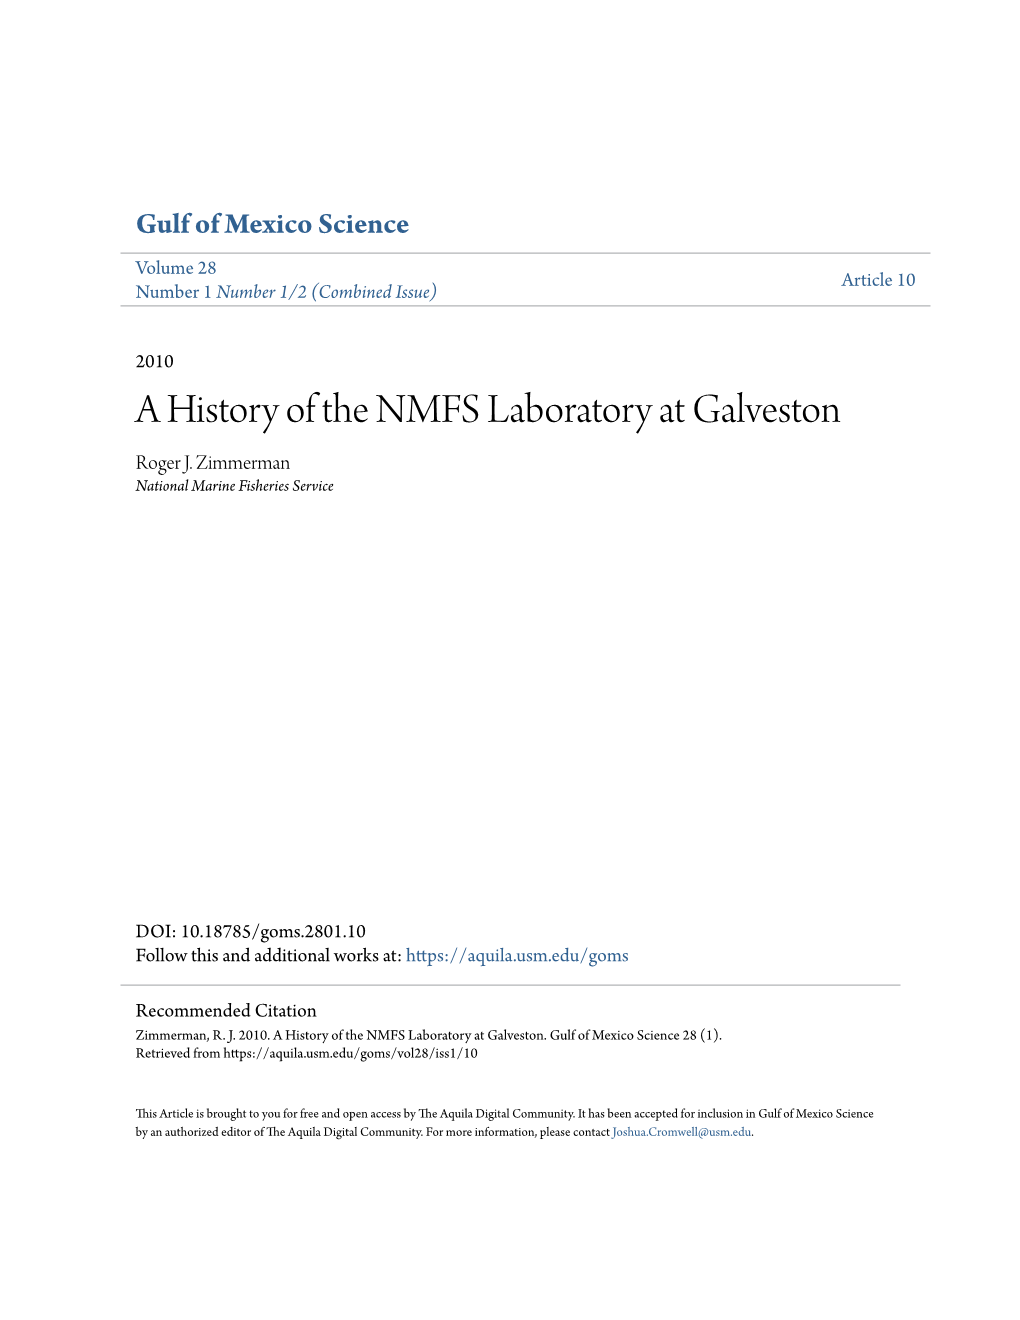 A History of the NMFS Laboratory at Galveston Roger J